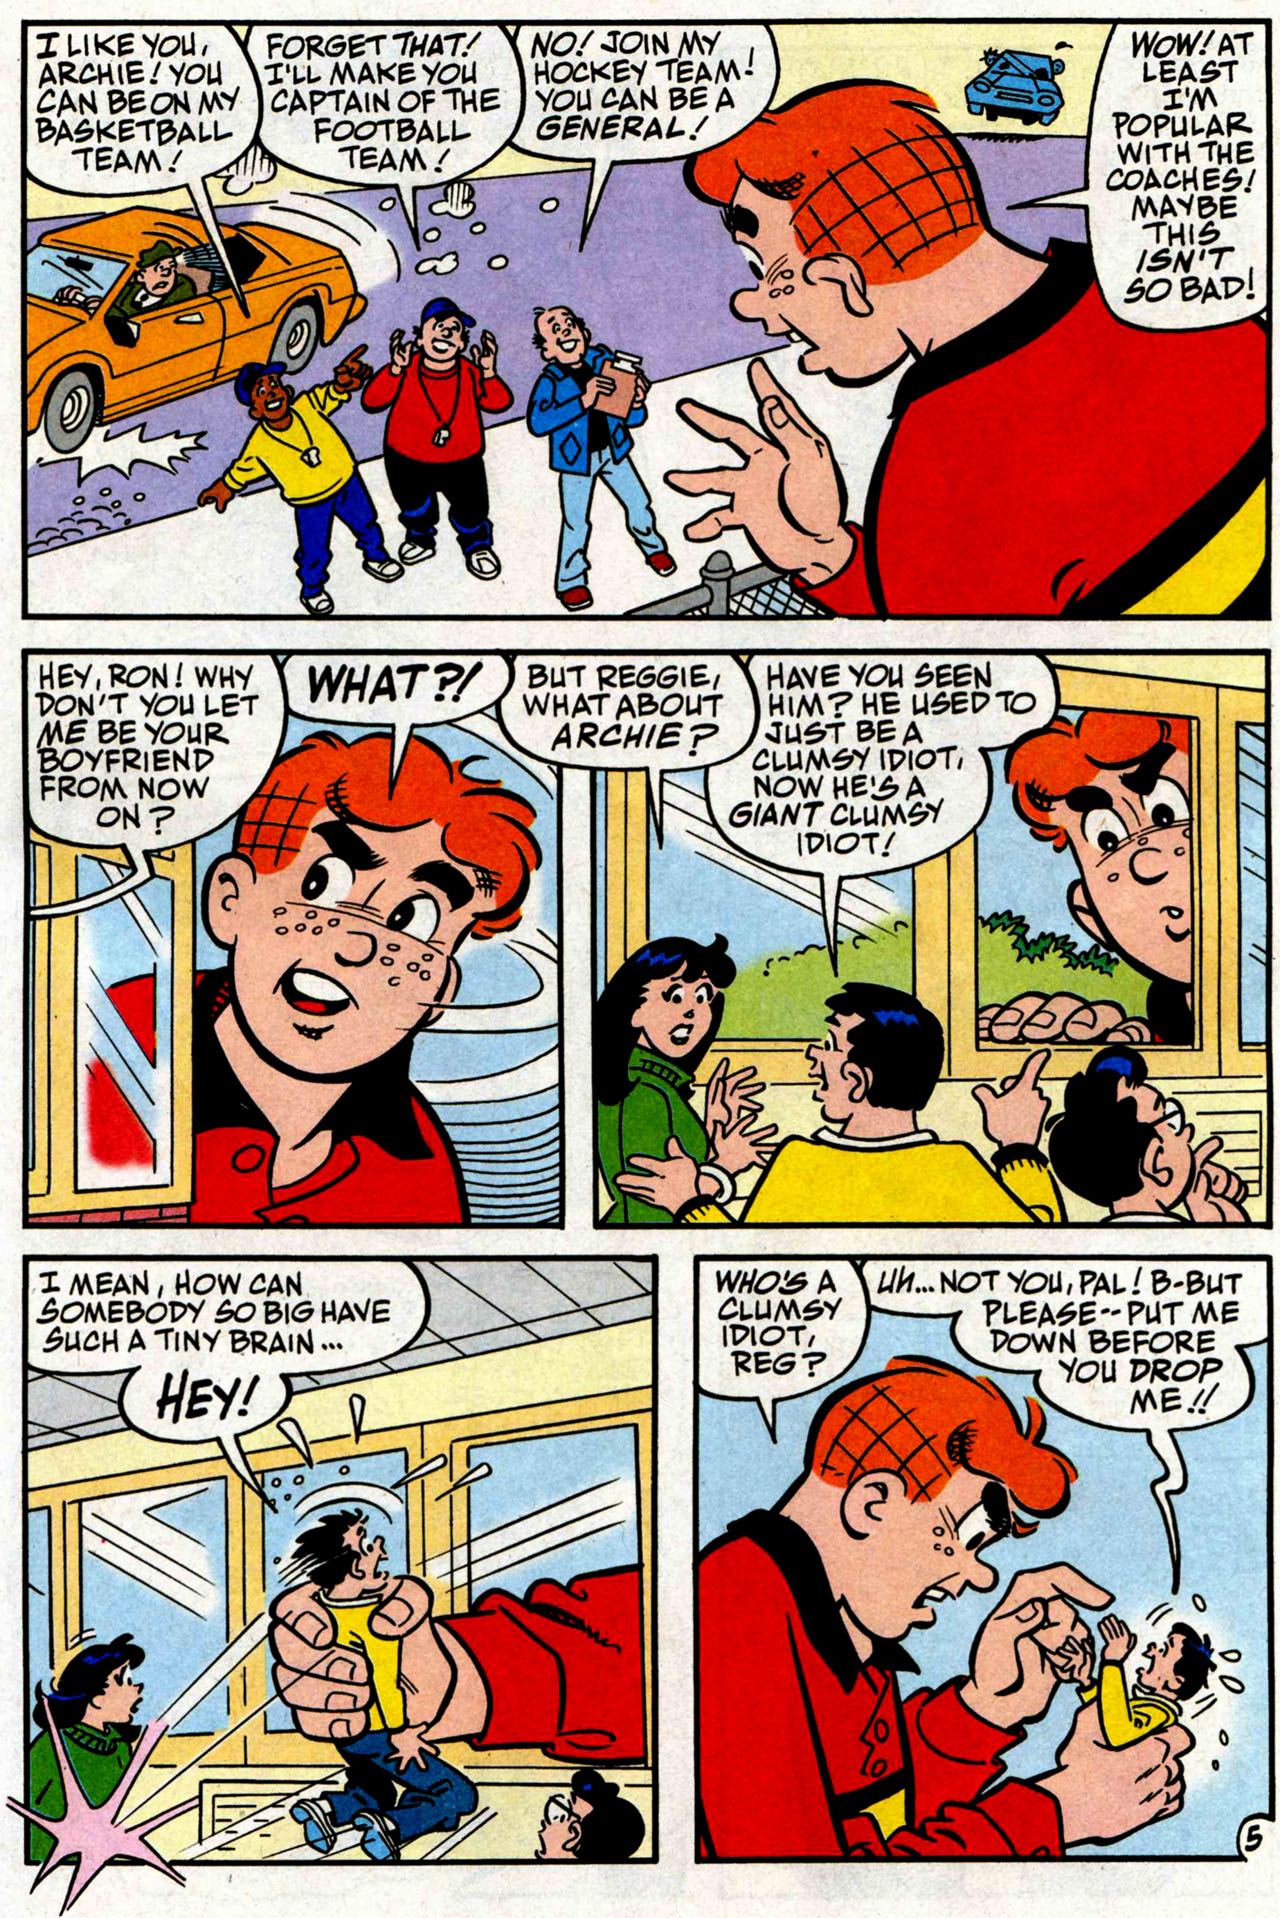 Read online Archie (1960) comic -  Issue #583 - 12